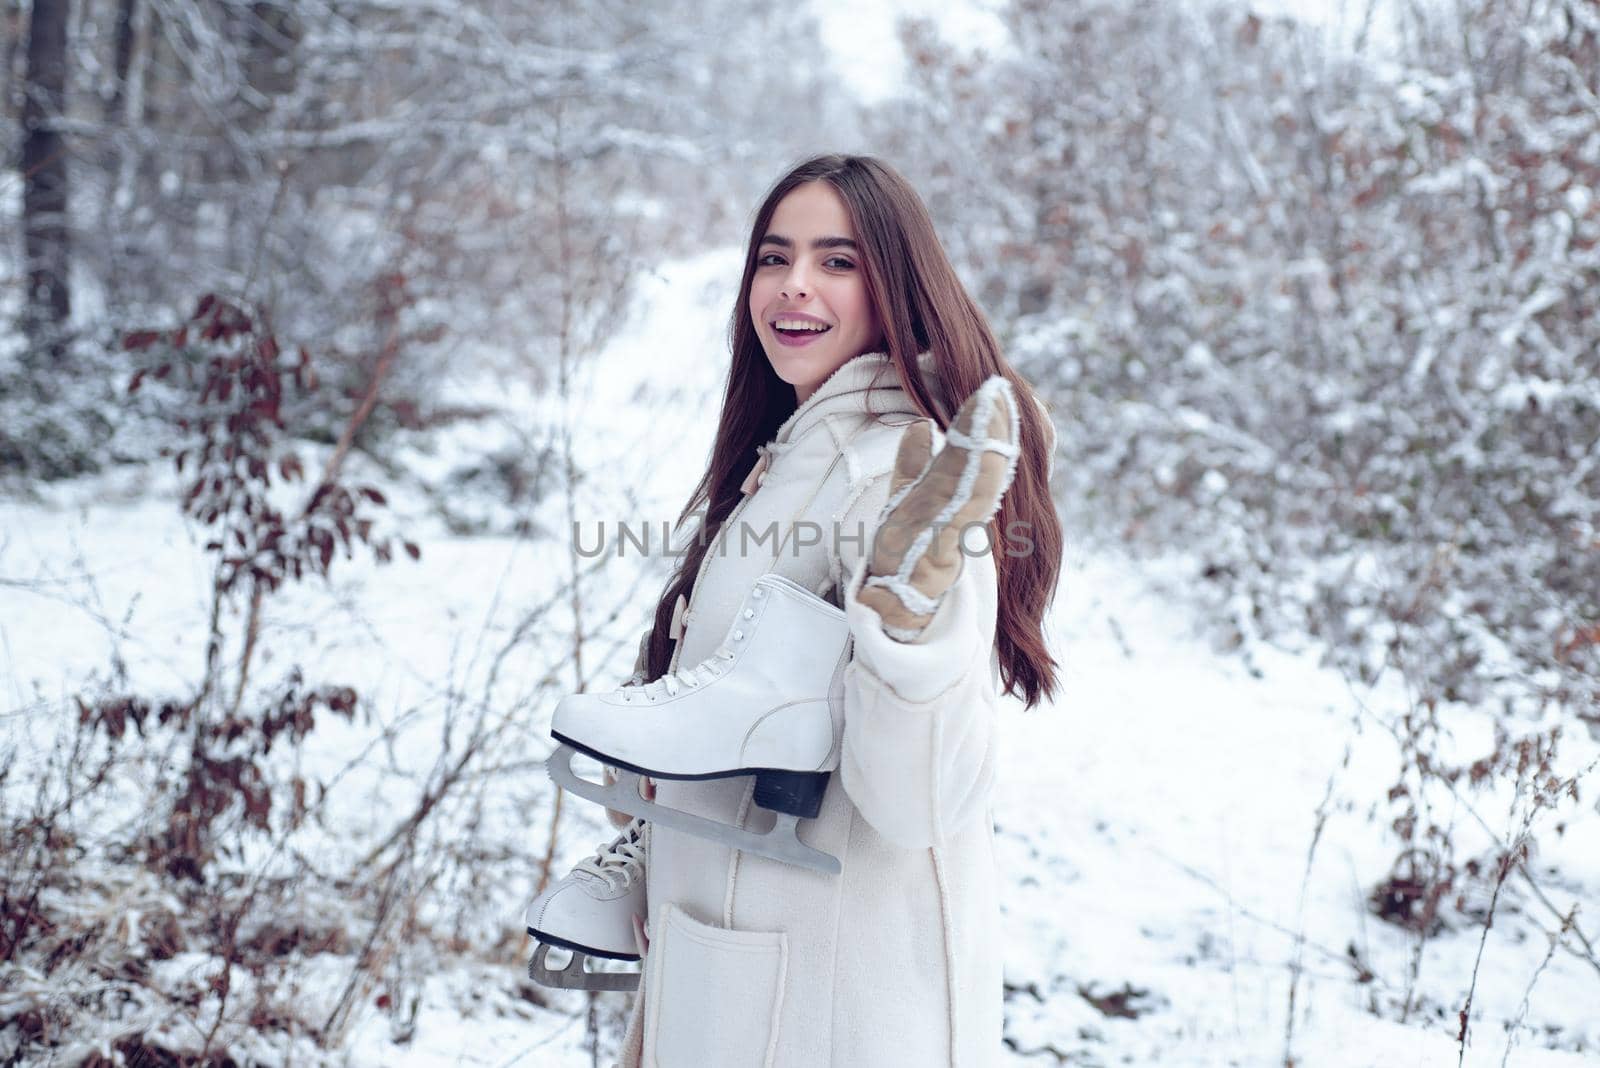 Winter woman. Laughing Girl Outdoors. Model wearing stylish sweater and gloves. Portrait of a young woman in snow trying to warm herself. Winter woman